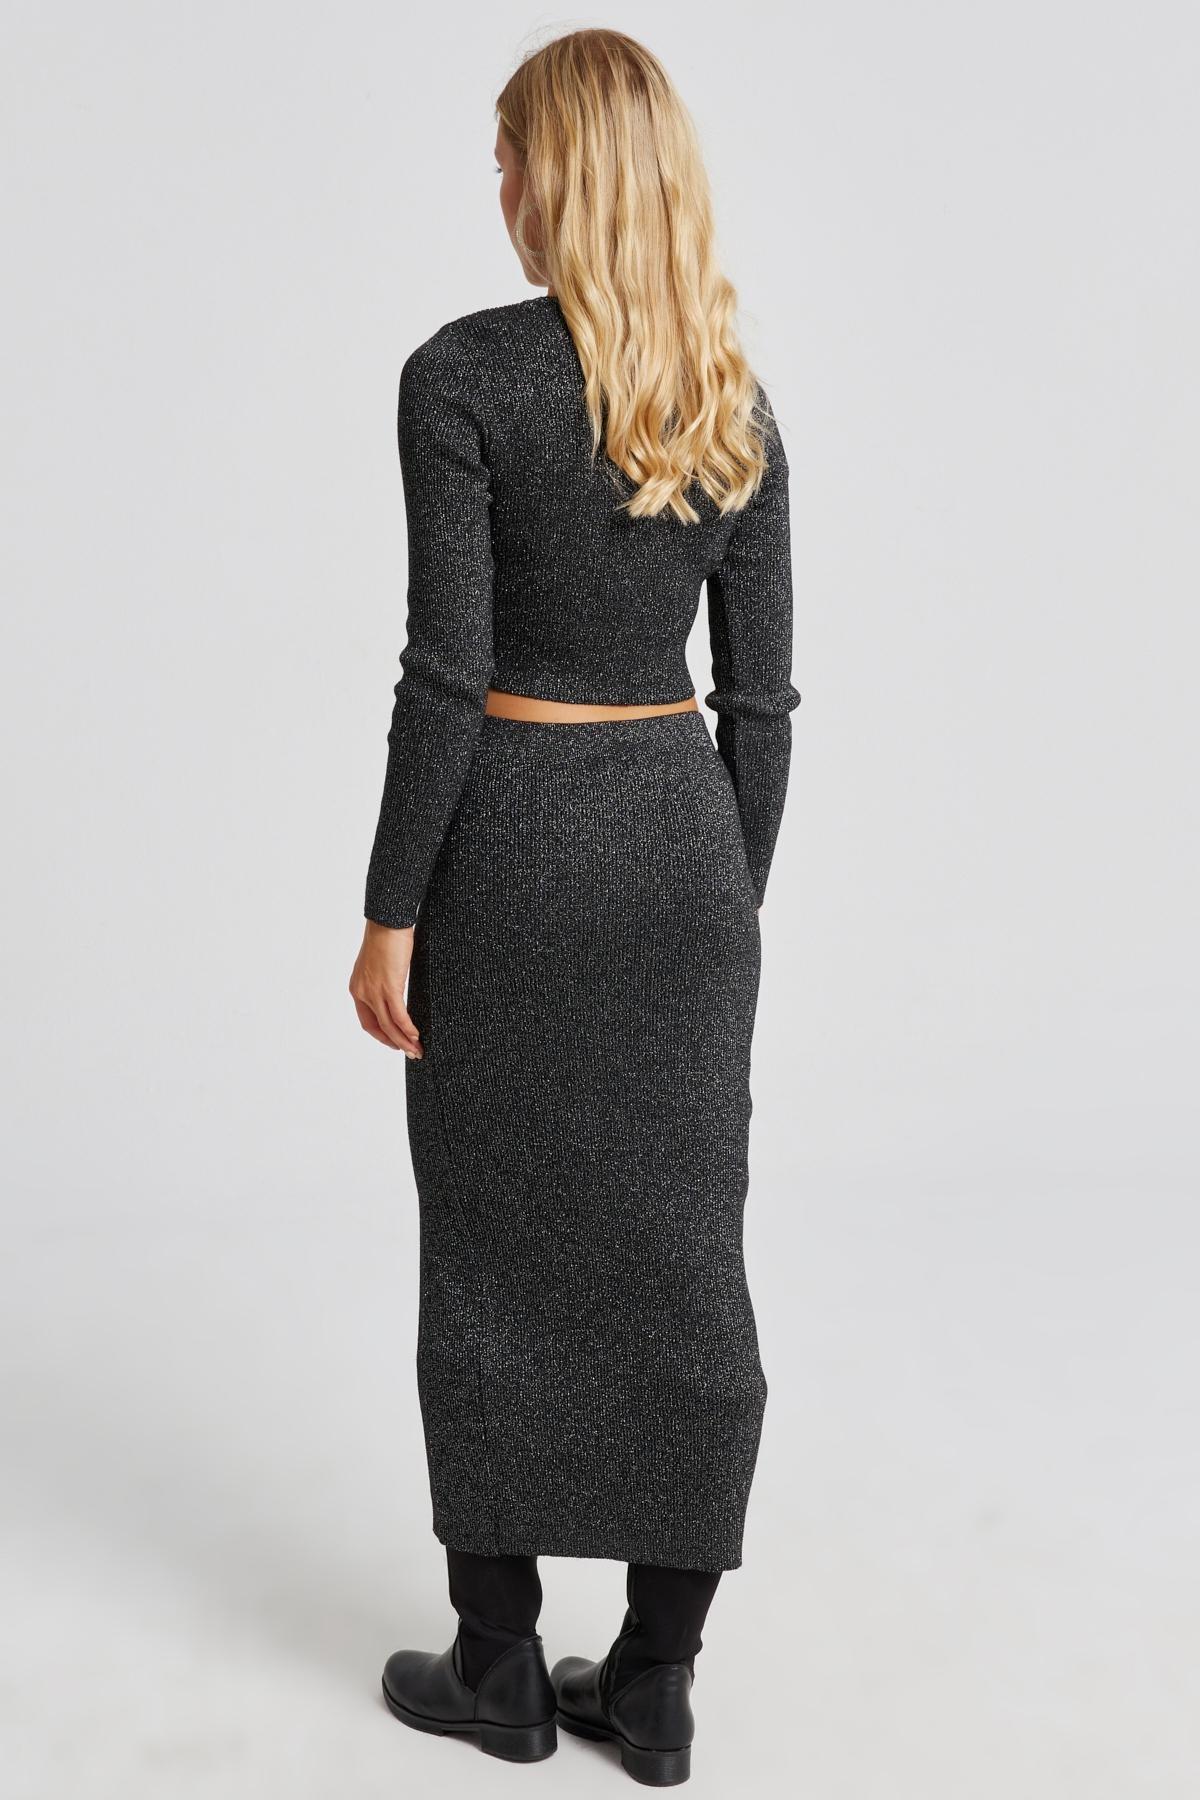 Cool & Sexy - Black Silvery Knitted Co-Ord Set